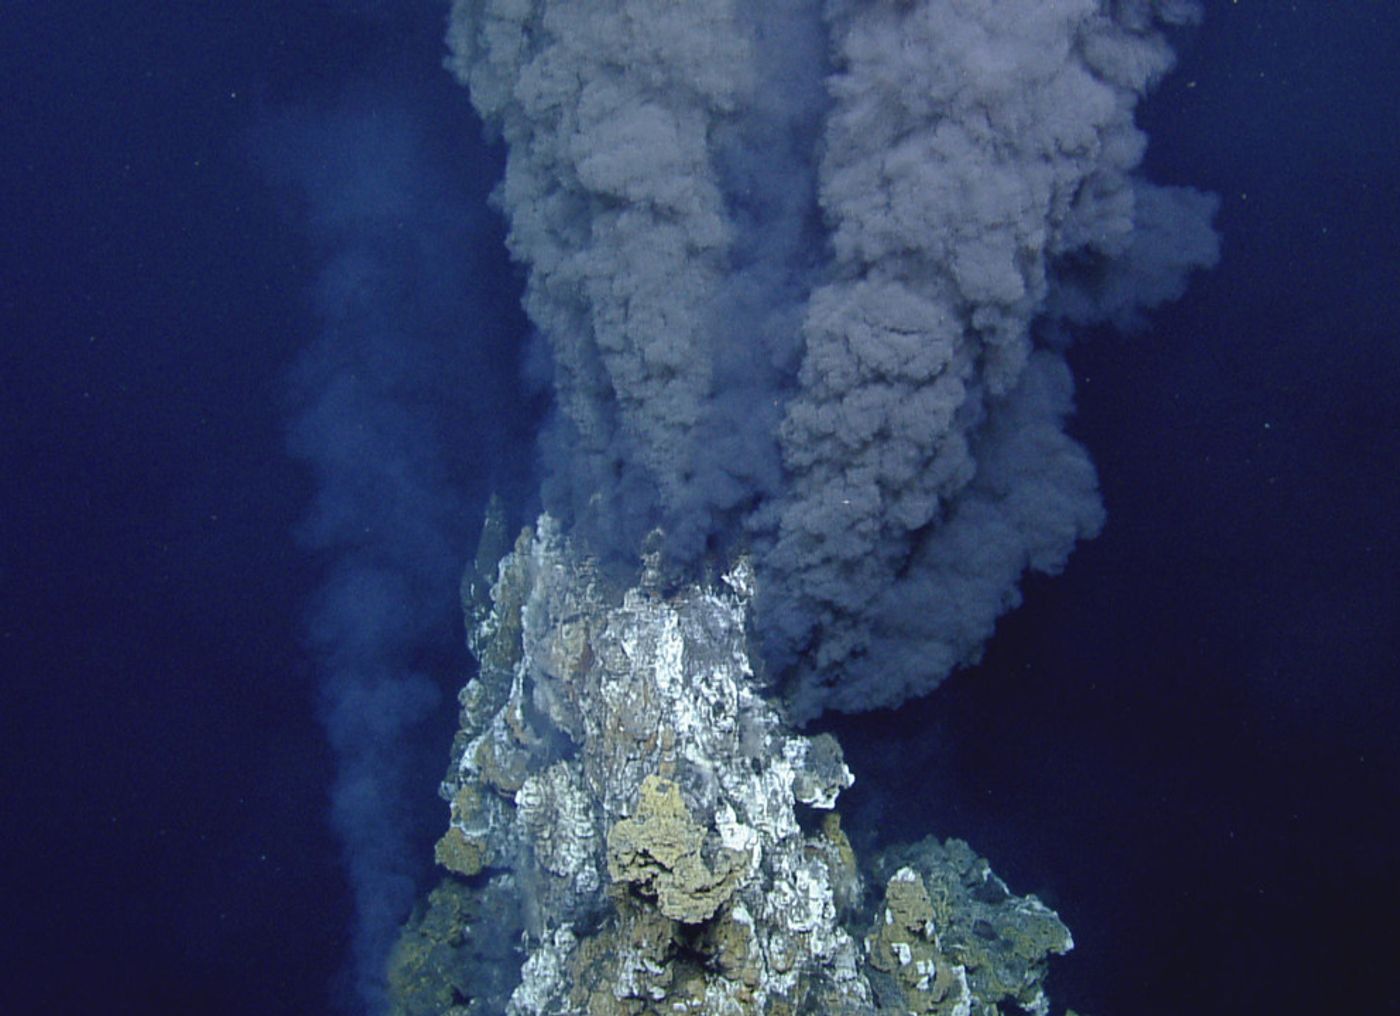 Hydrothermal vents like this one could provide enough heat for deep-sea skates to incubate their eggs more quickly.